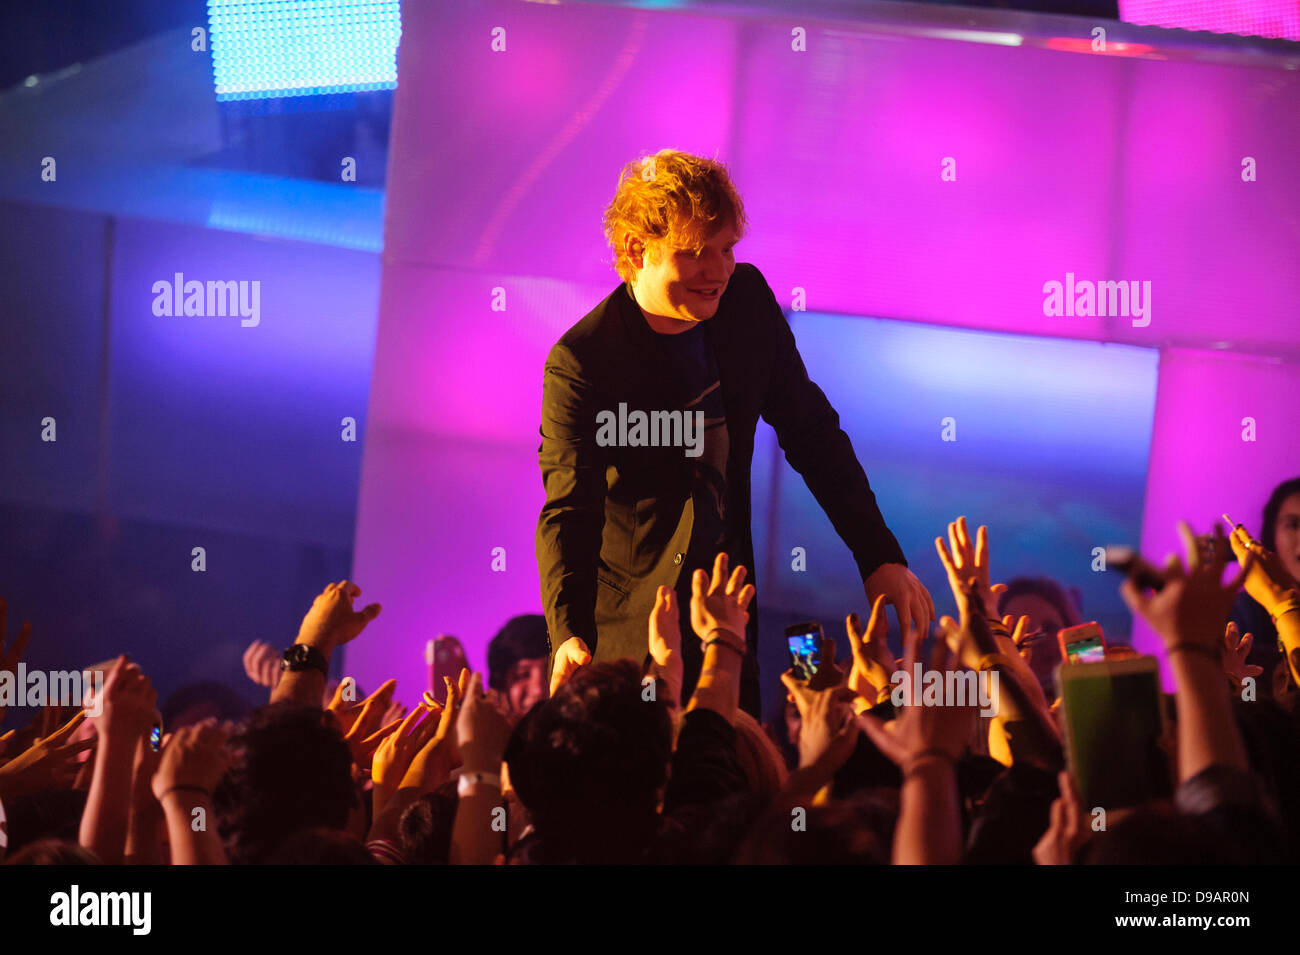 Toronto, Canada. 16th June, 2013.  Ed Sheeran performs at the 2013 MMVA in Toronto Canada. The MuchMusic Video Awards took over the trendy Queen West village in Toronto for an award show featuring PSY and other super stars including Avril Lavigne, Demi Lovato, Serena Ryder, Ed Sheeran, Marianas Trench, Classified, and Armin Van Buuren with Trevor Guthrie. Credit:  Victor Biro/Alamy Live News Stock Photo